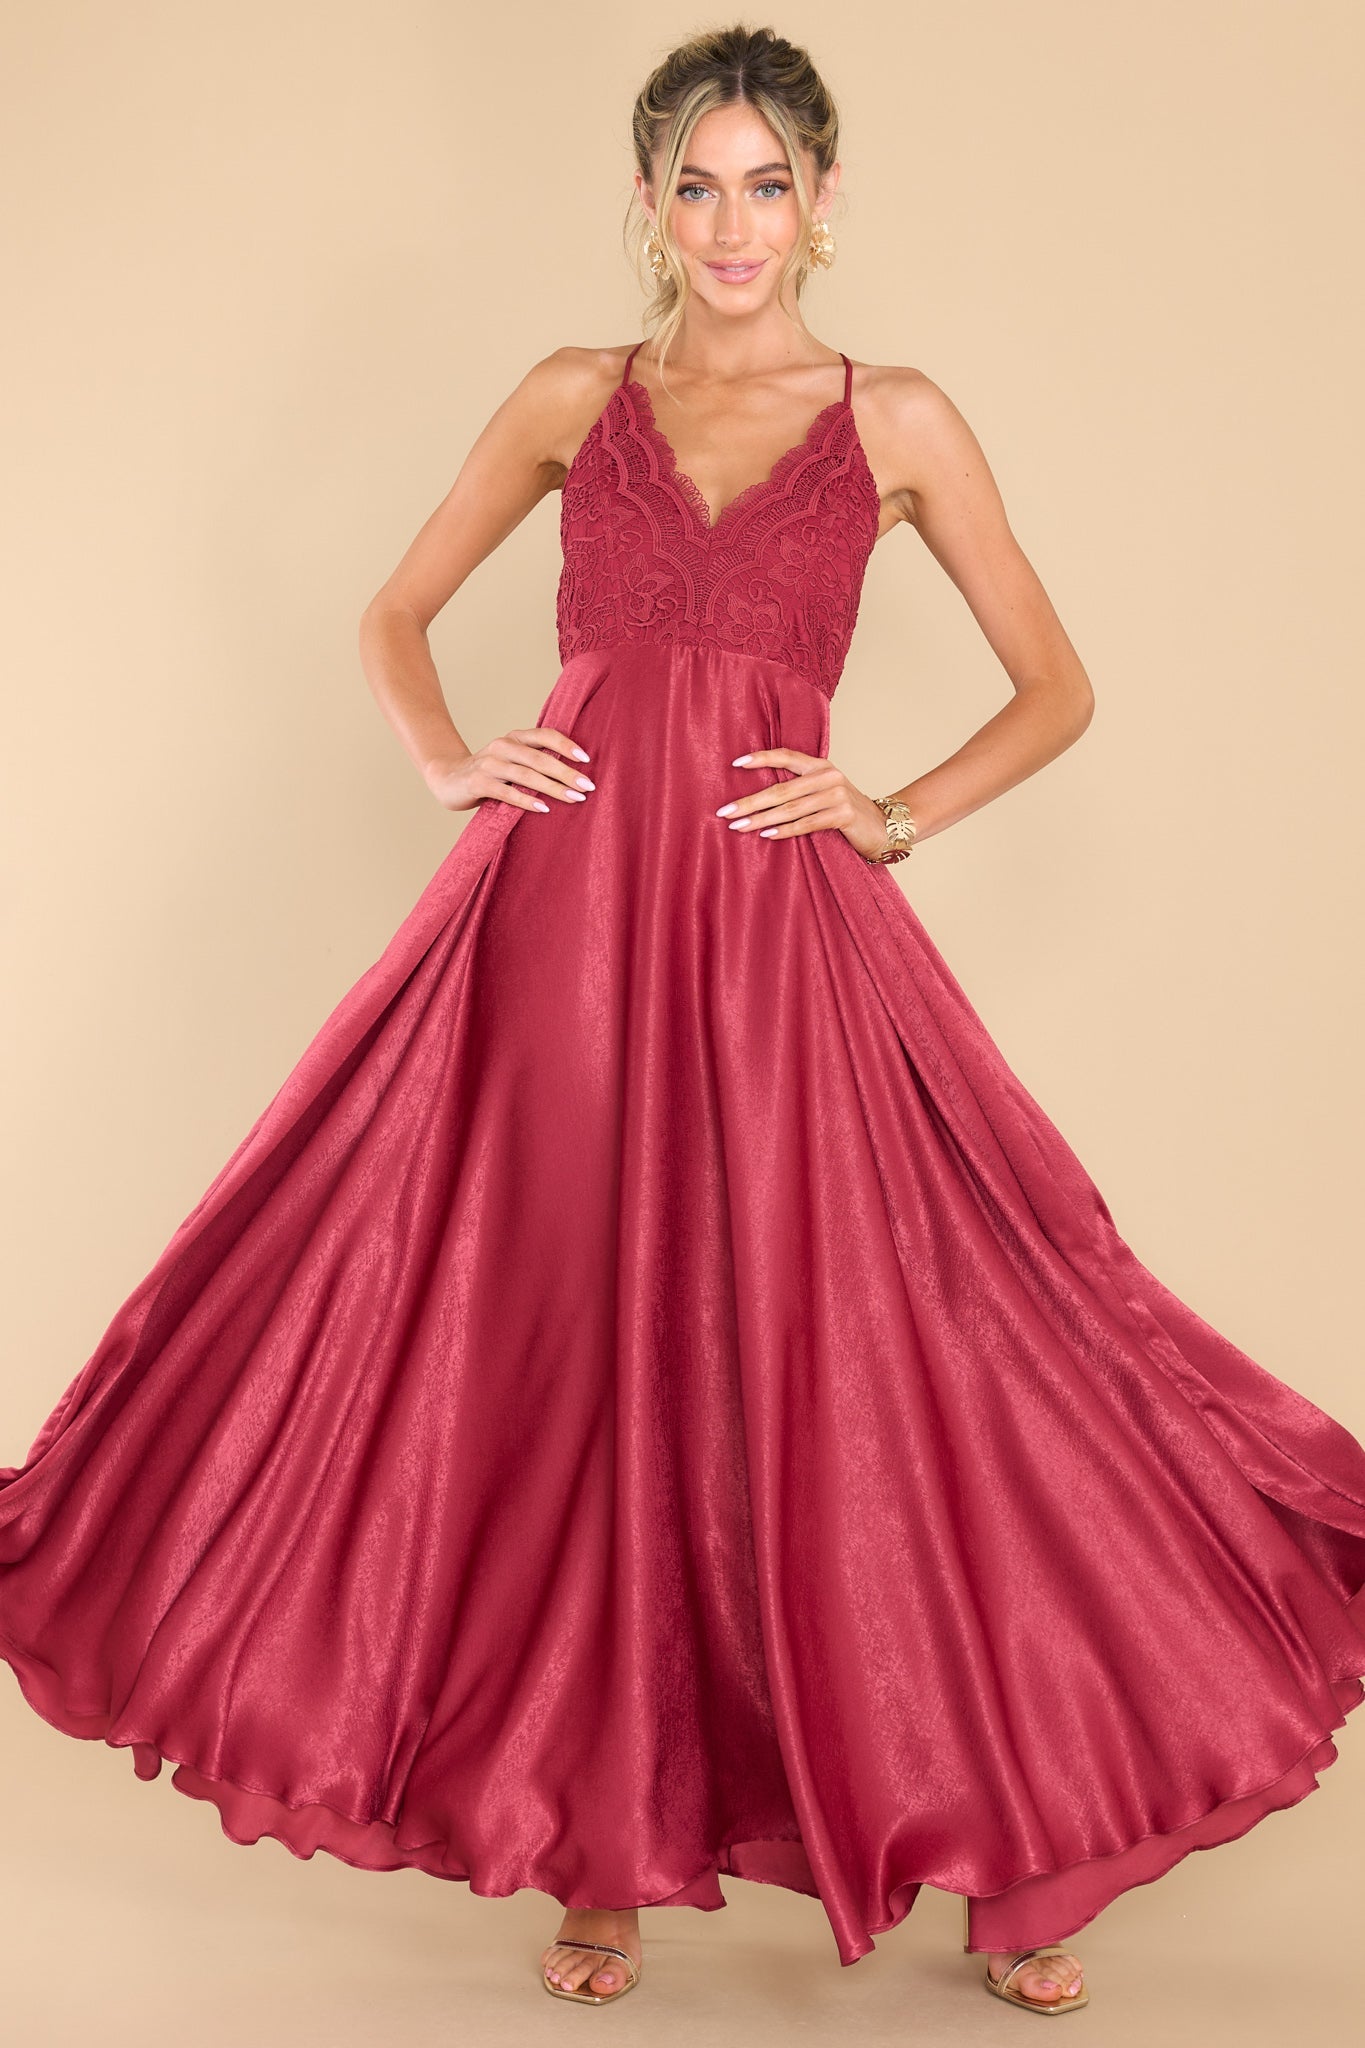 Stunning Cranberry Contrast Lace Top Dress - Maxi Dresses | Red Dress